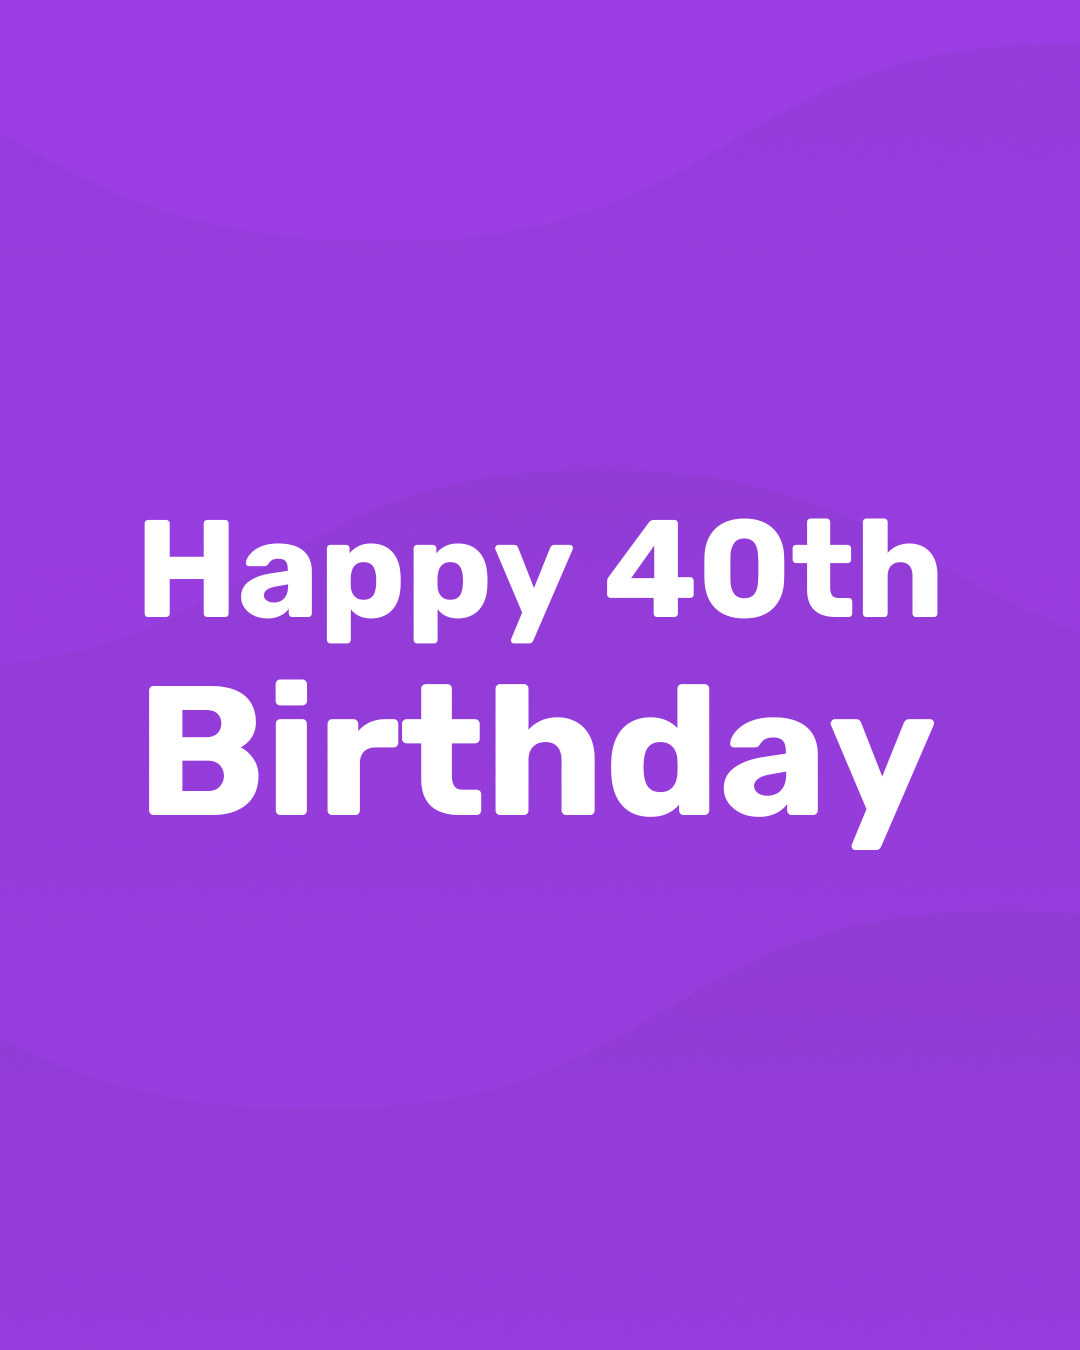 100+ 40th Birthday Wishes for Your Friends and Family - Blog - memmo